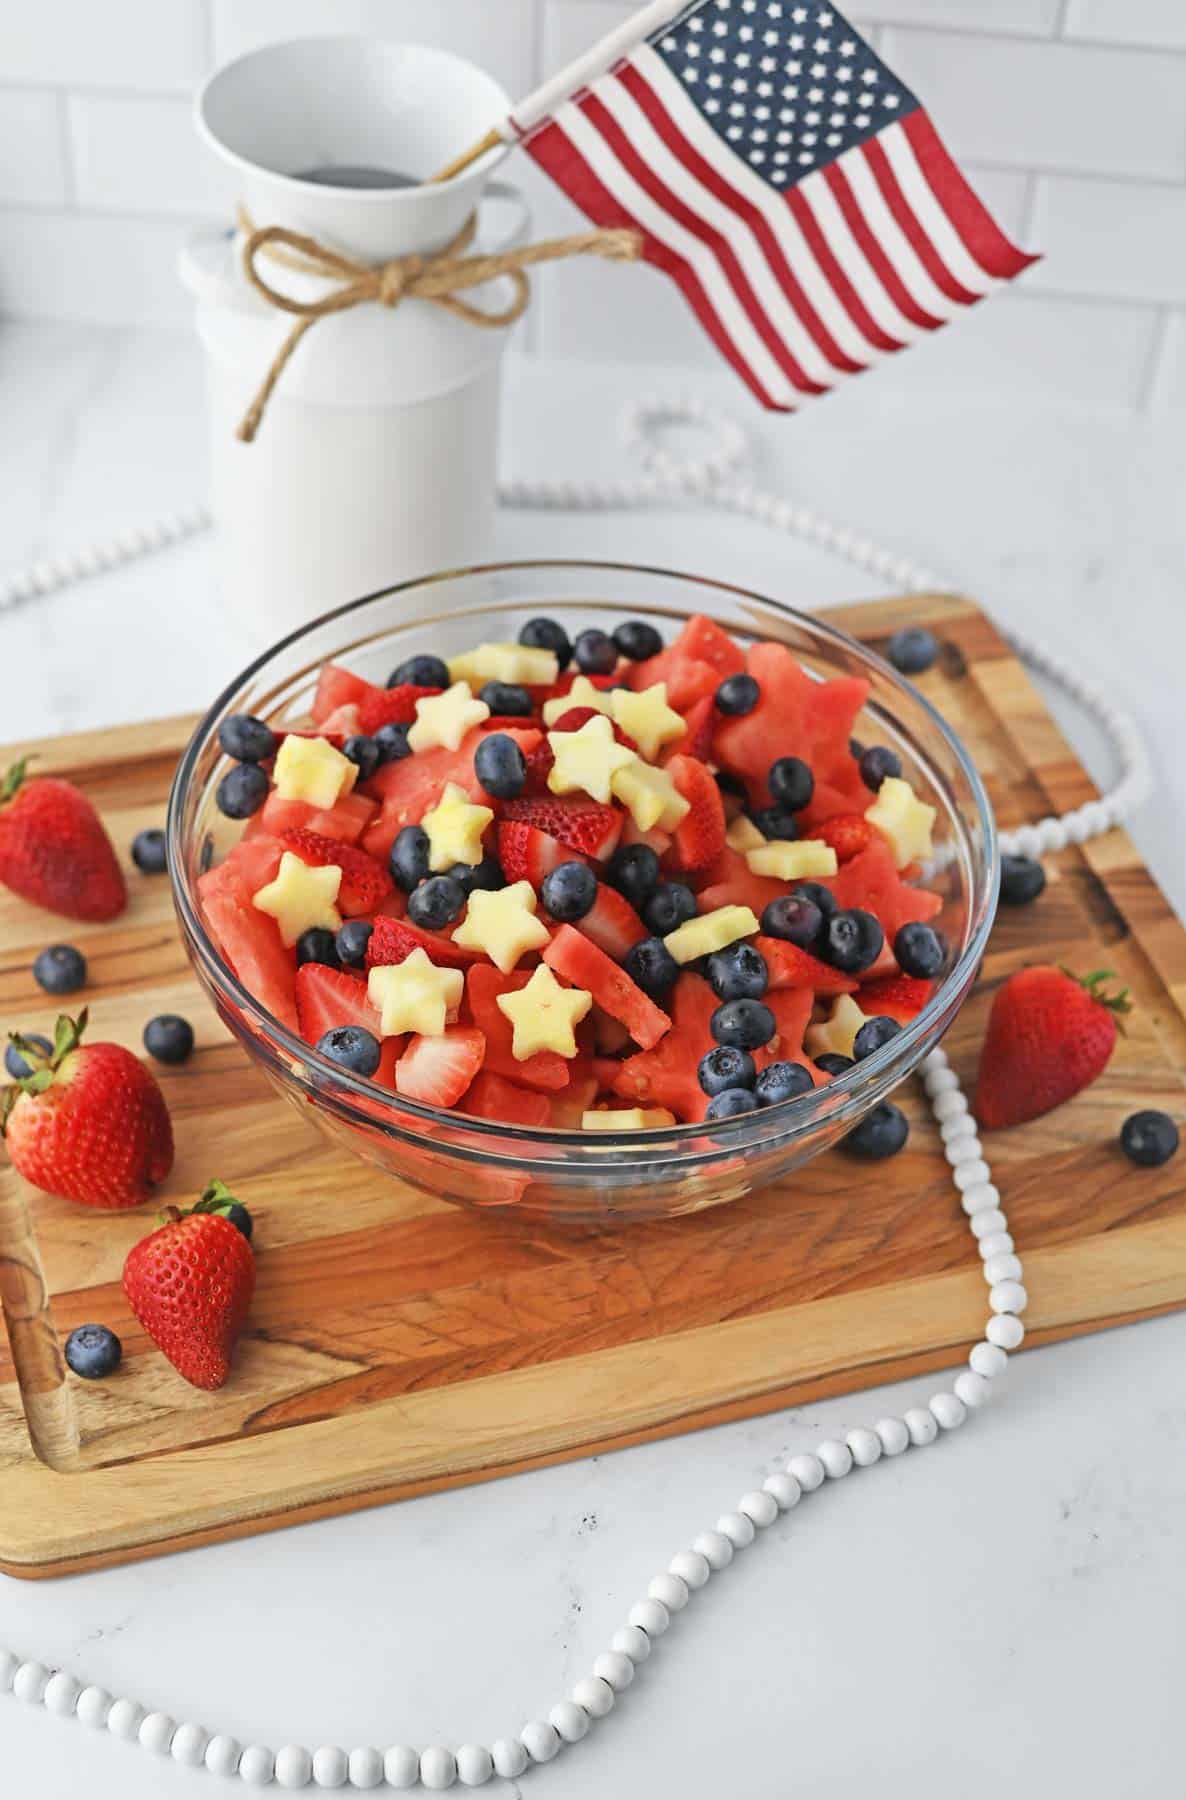 star-shaped fruit with strawberries and blueberries in bowl with small USA flag in background